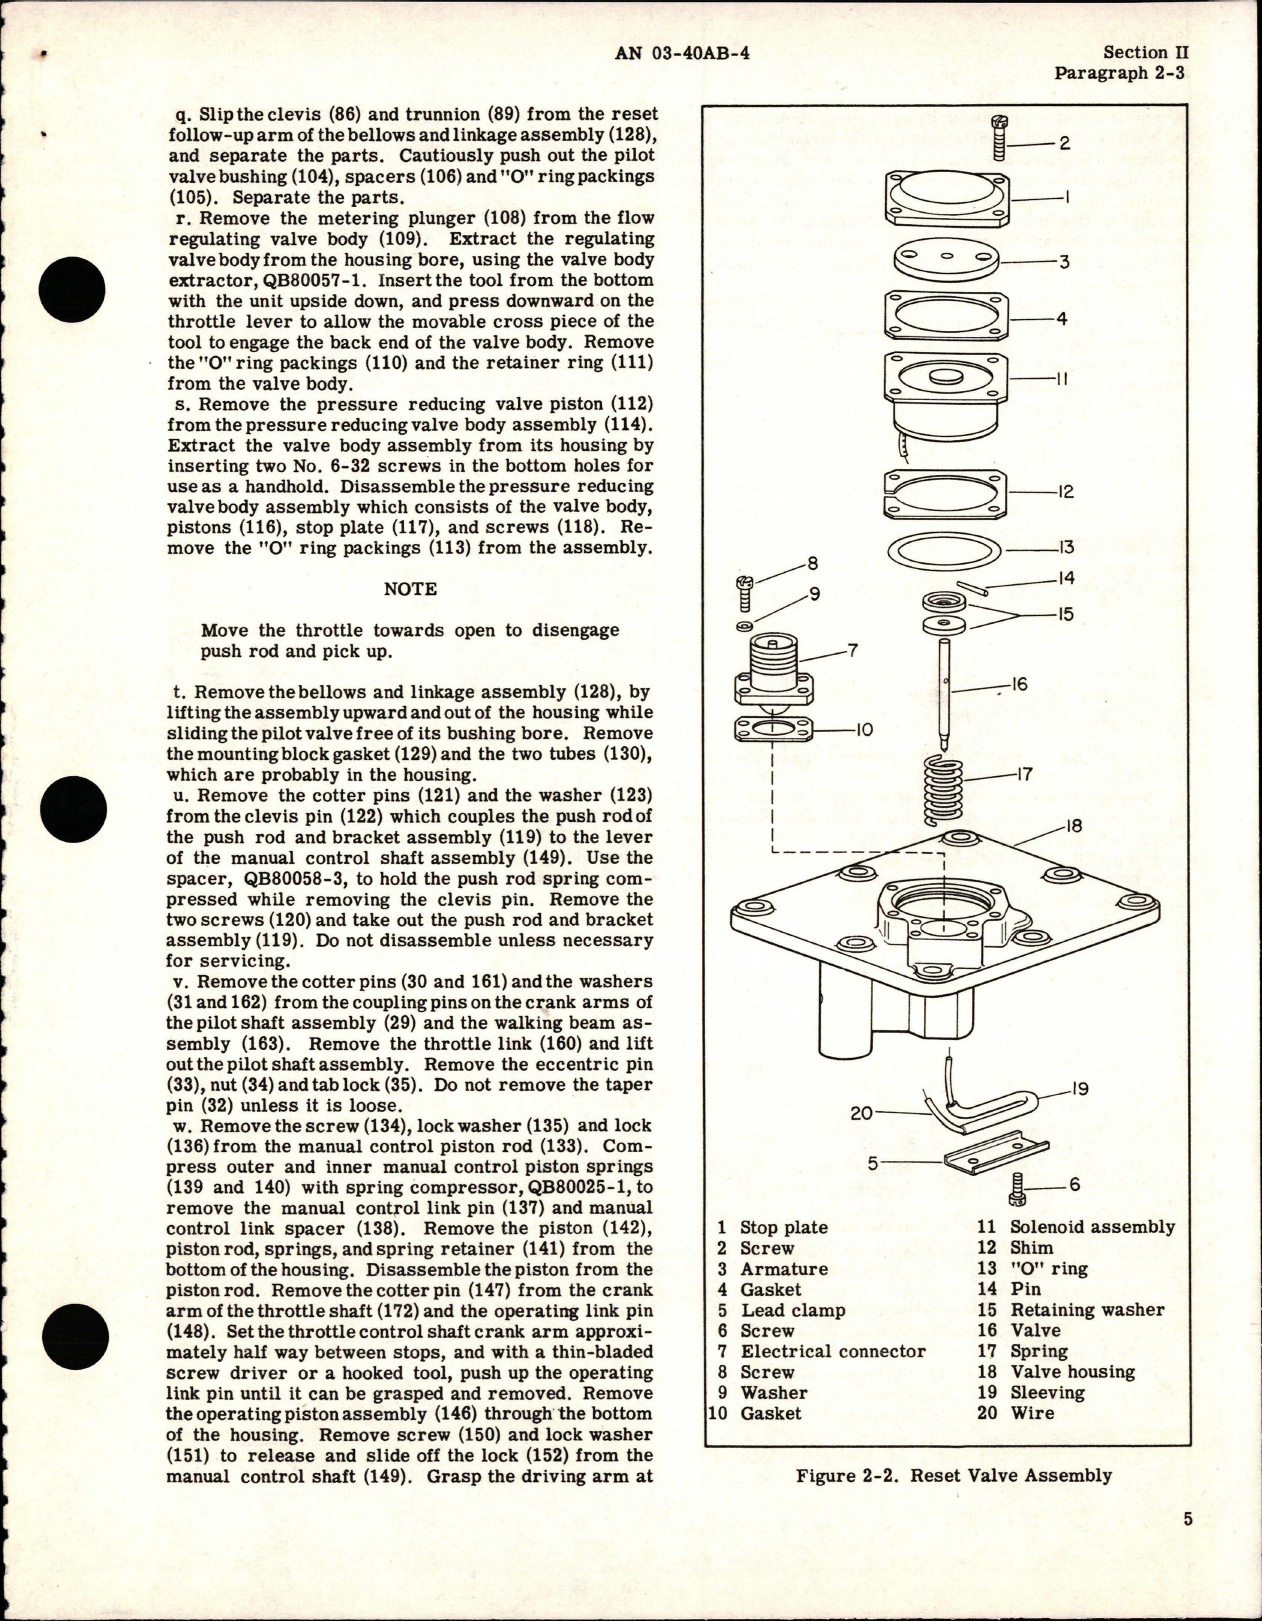 Sample page 9 from AirCorps Library document: Overhaul Instructions for Automatic Engine Control - Part 1630-6-F